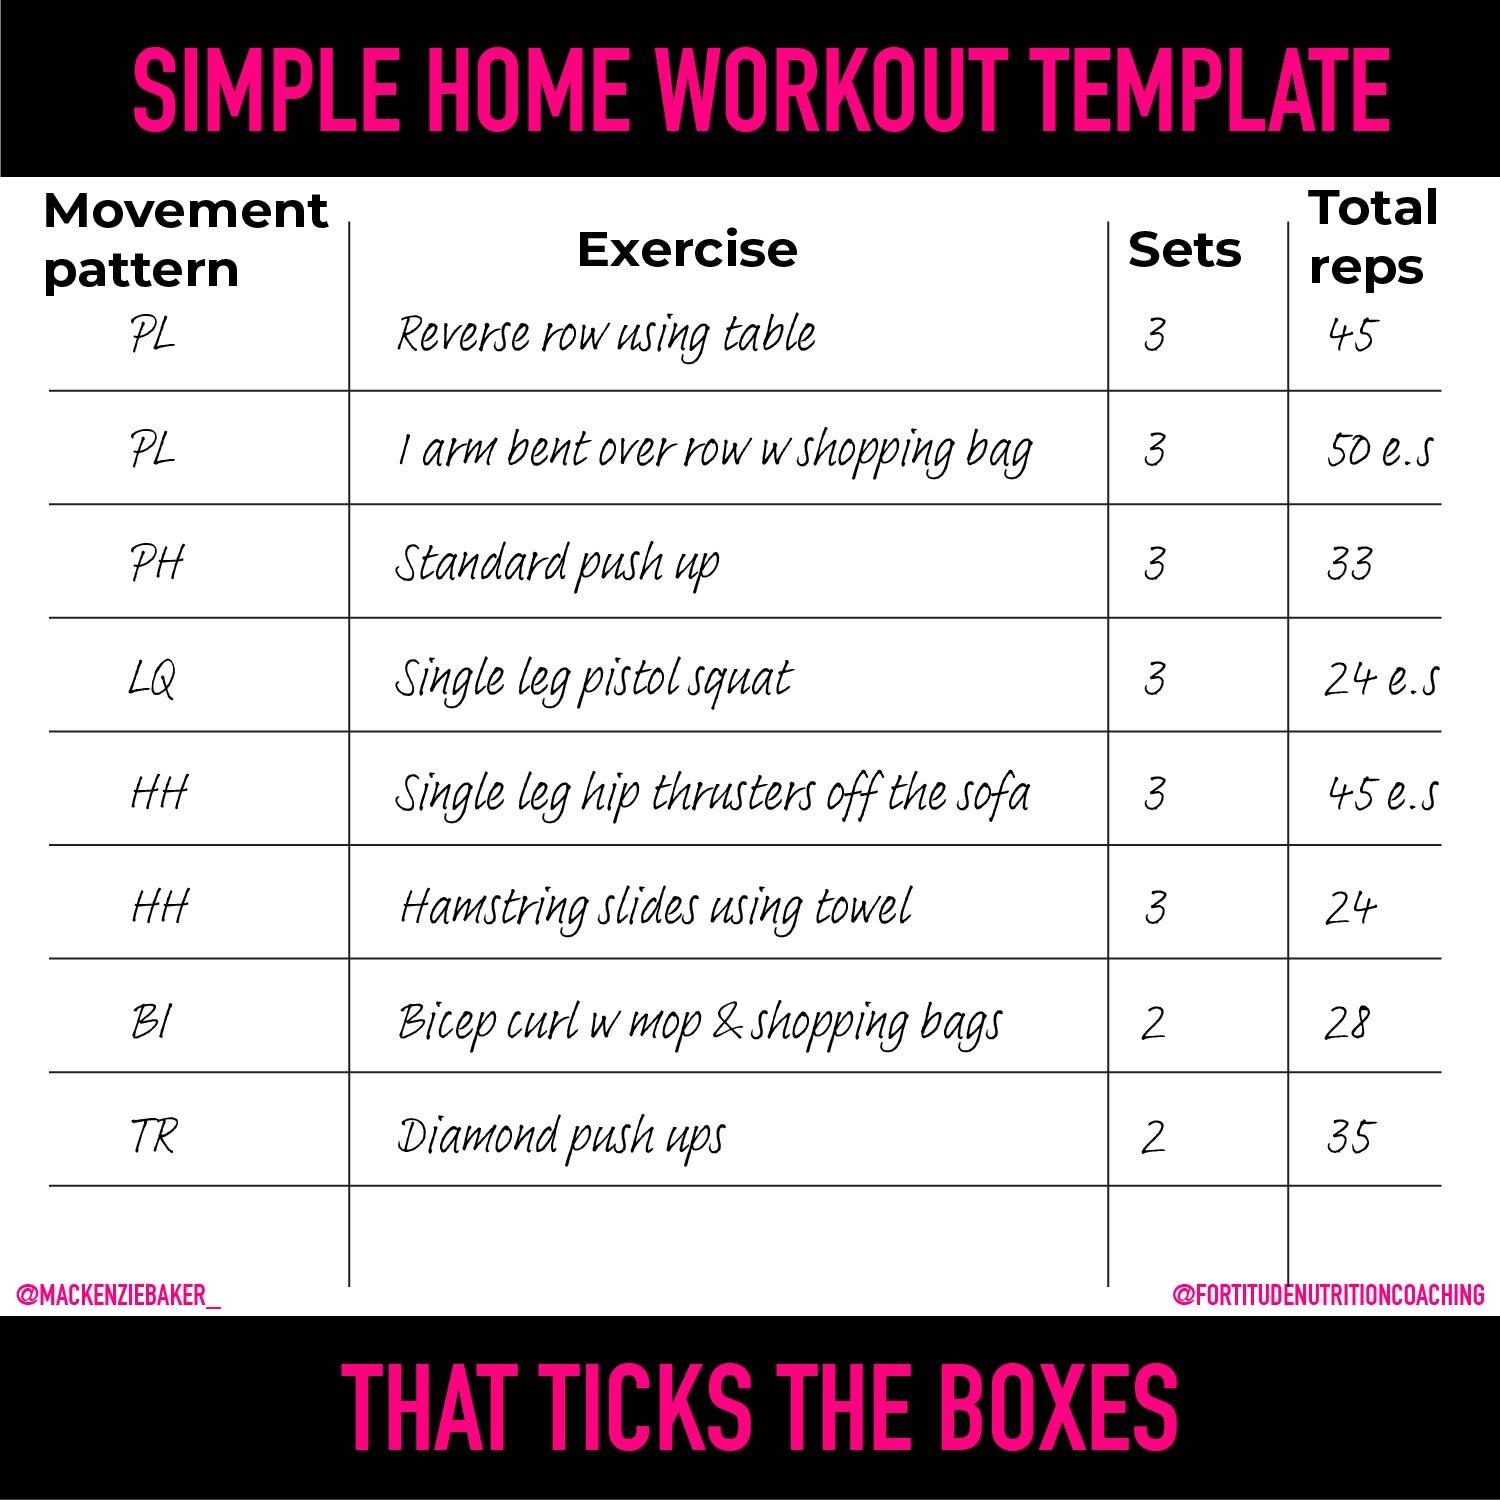 How to Build Your Own Workout Plan (+ Sample Template)